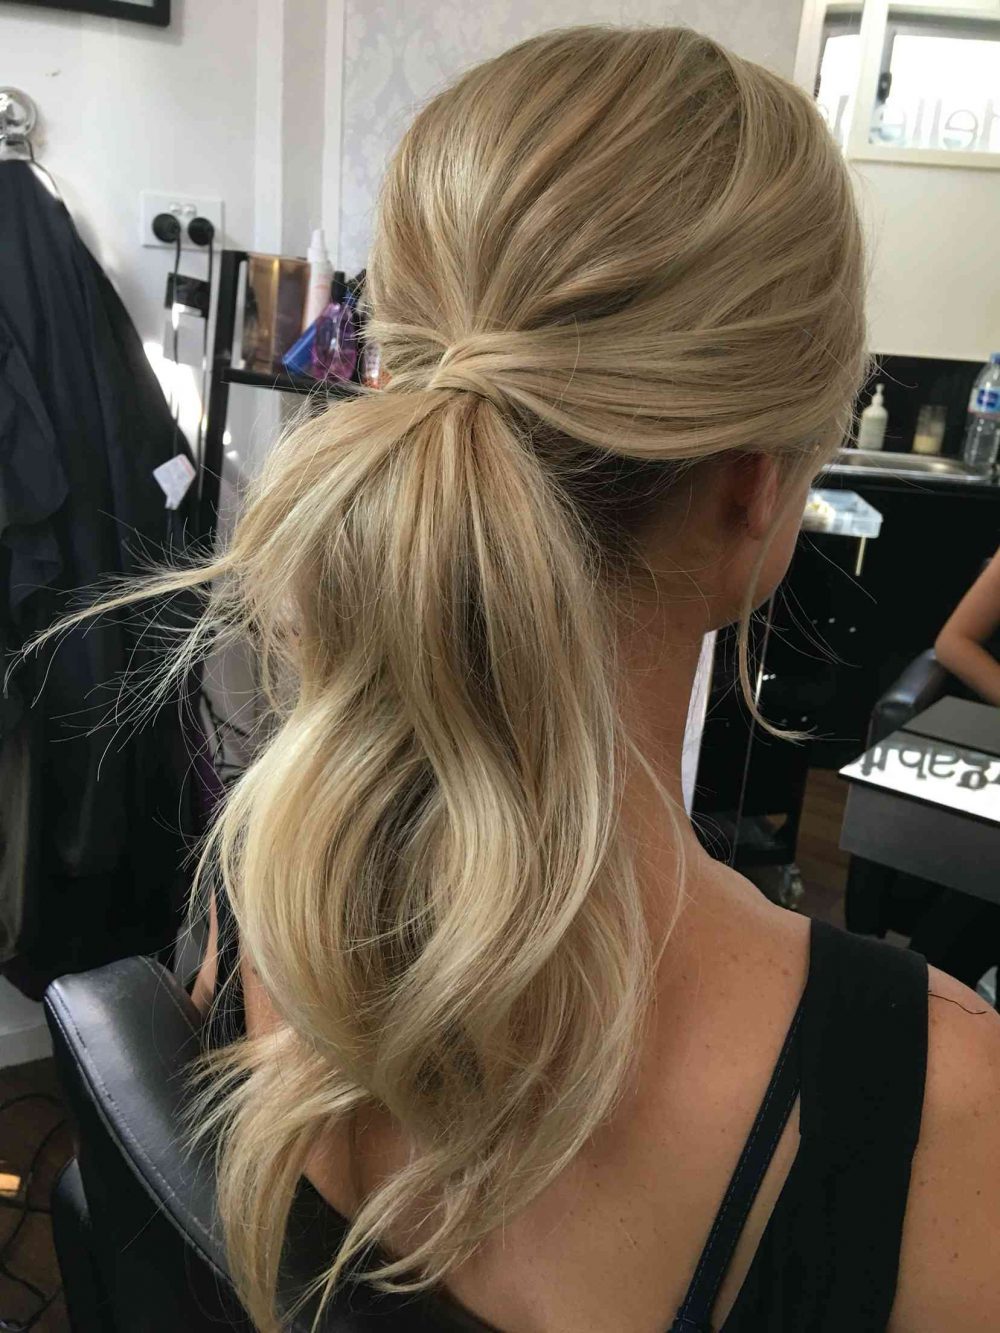 Easy hairstyles for long hair - amped up ponytail